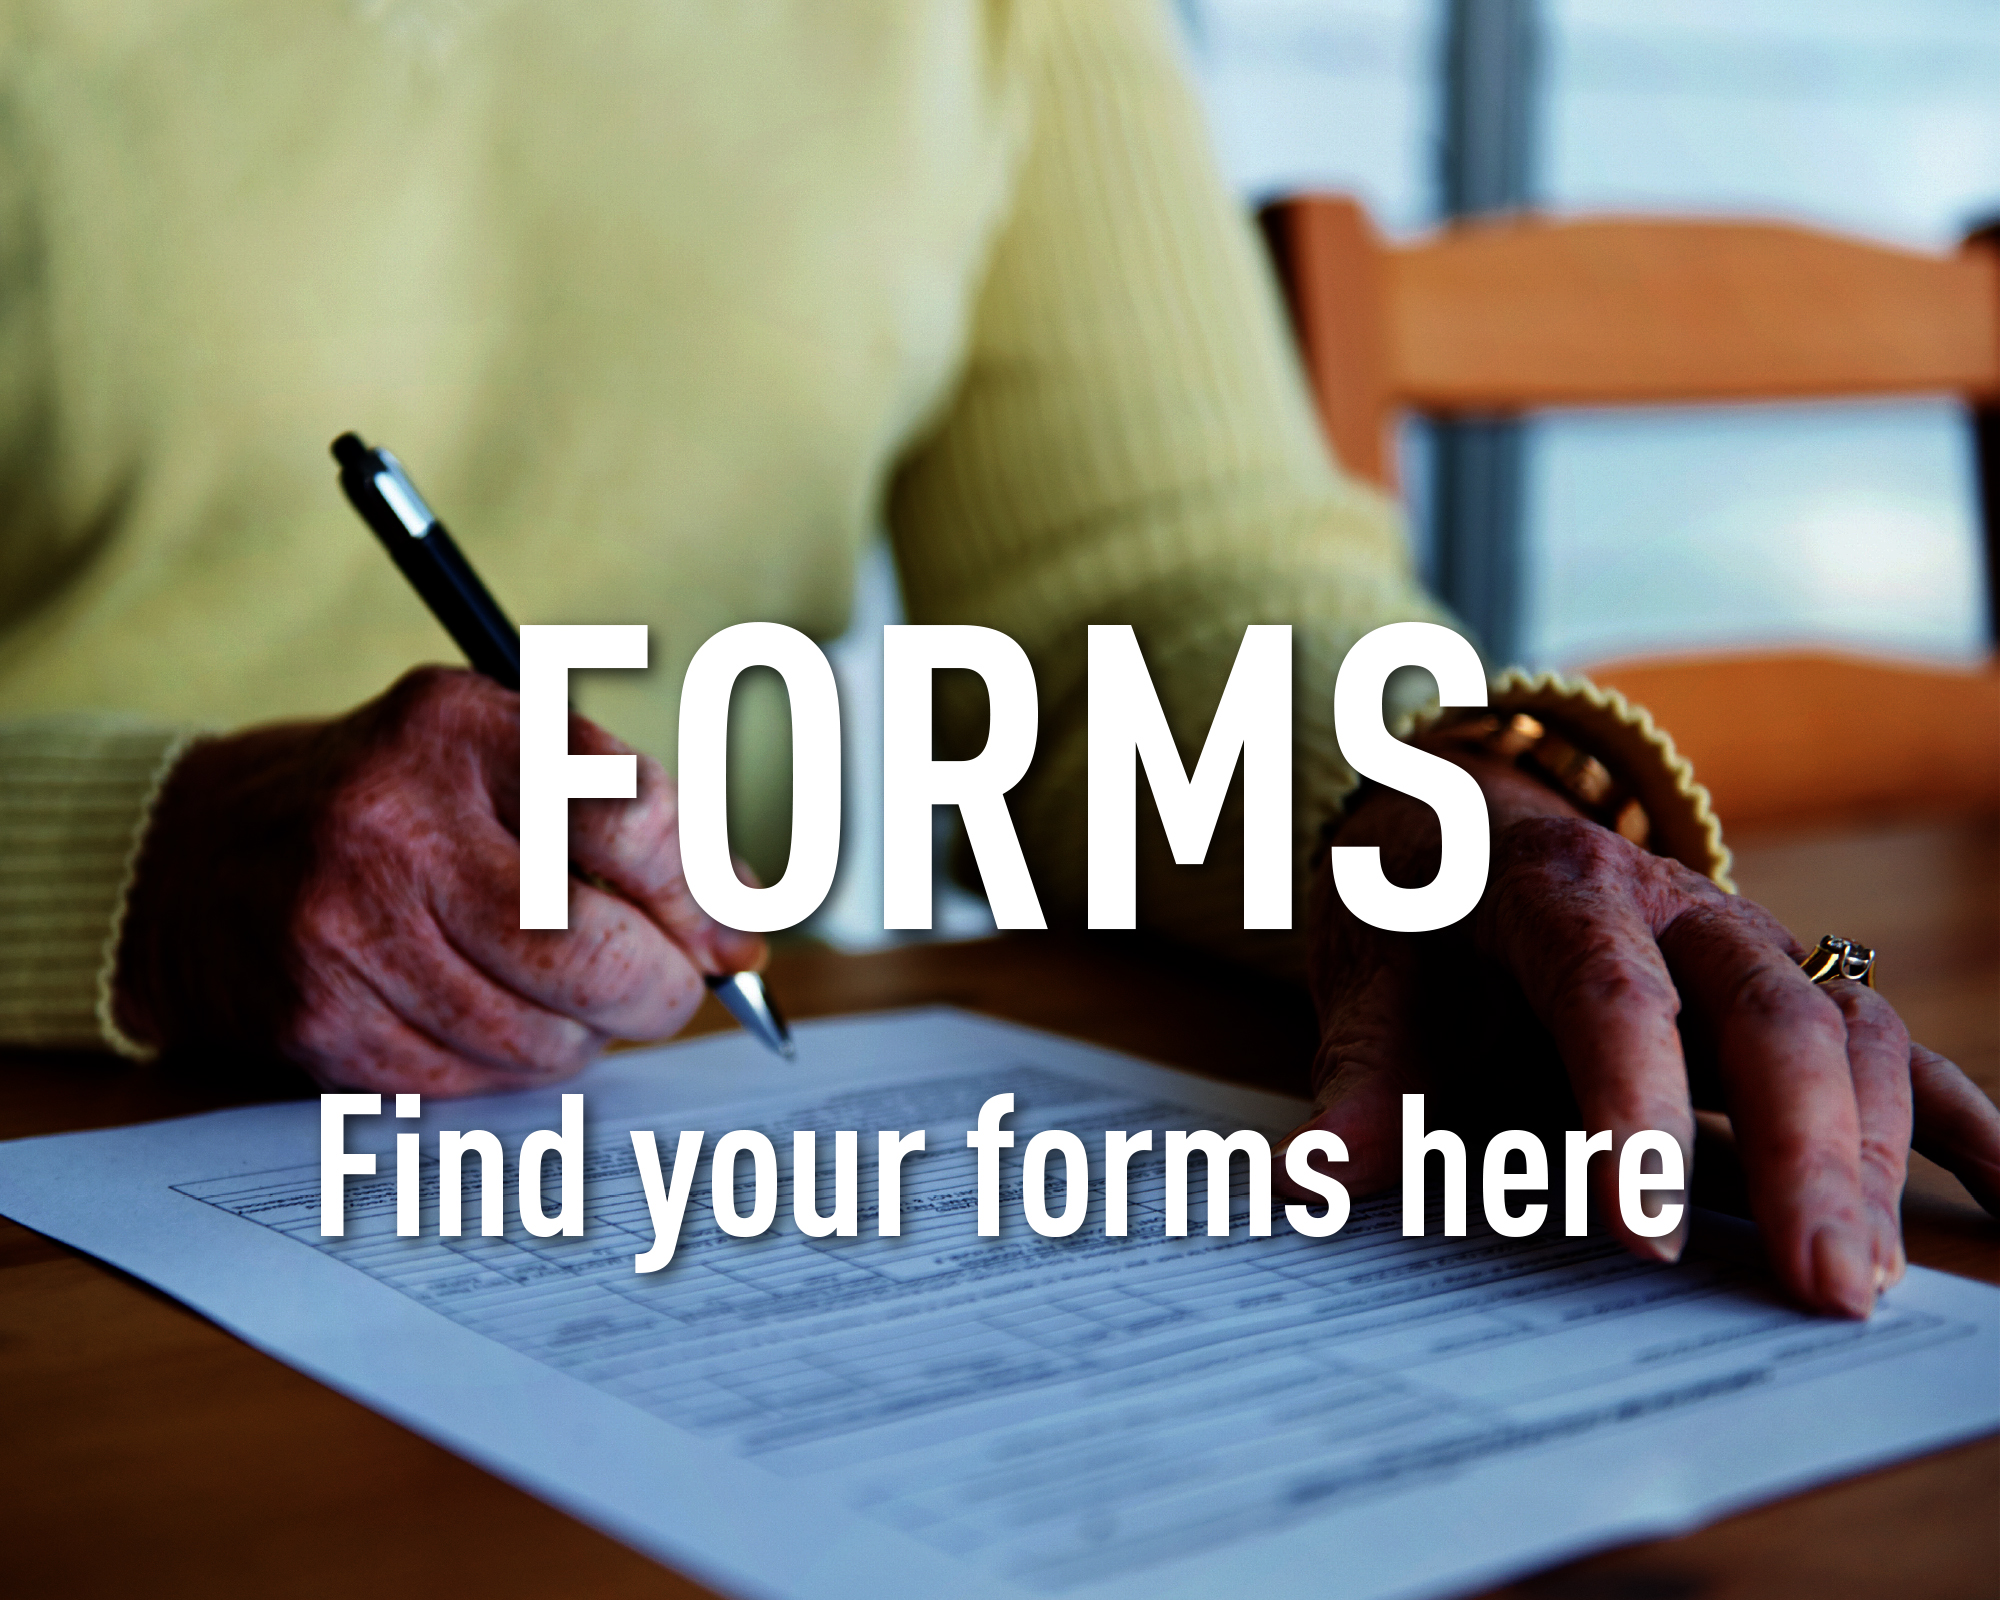 Forms. Find your forms here